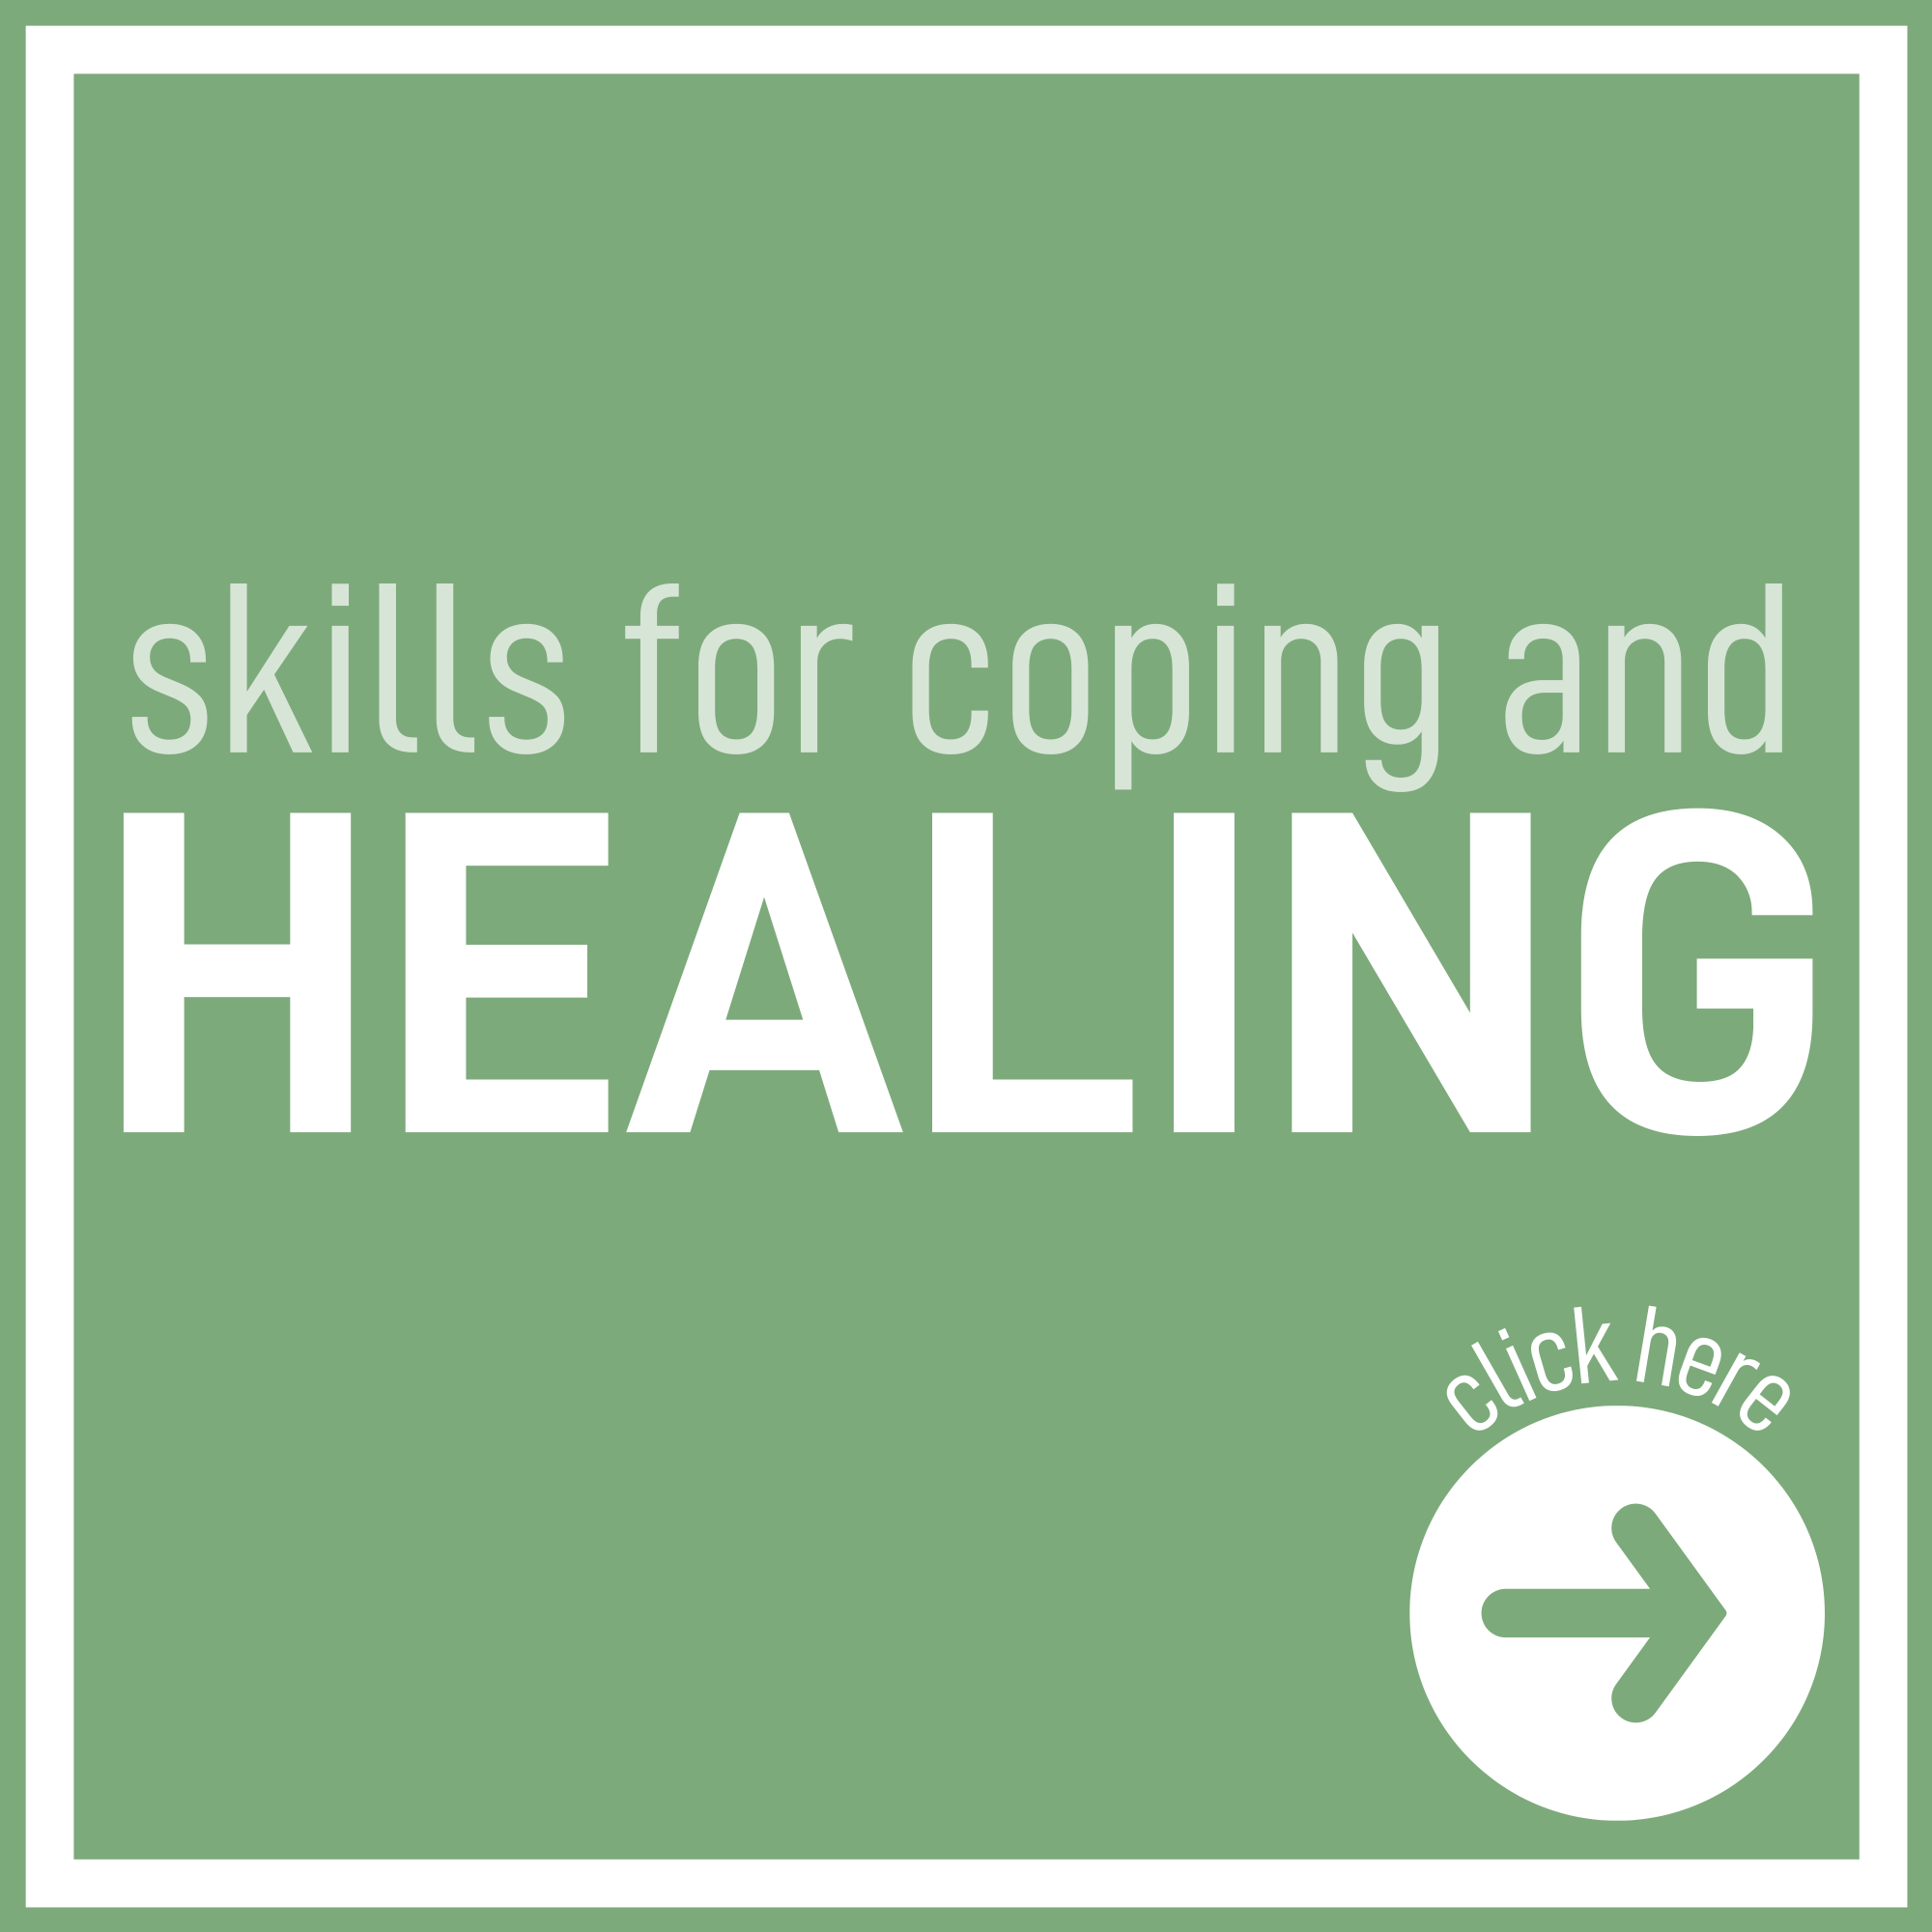 Green box with white text that says "Skills for coping and healing"